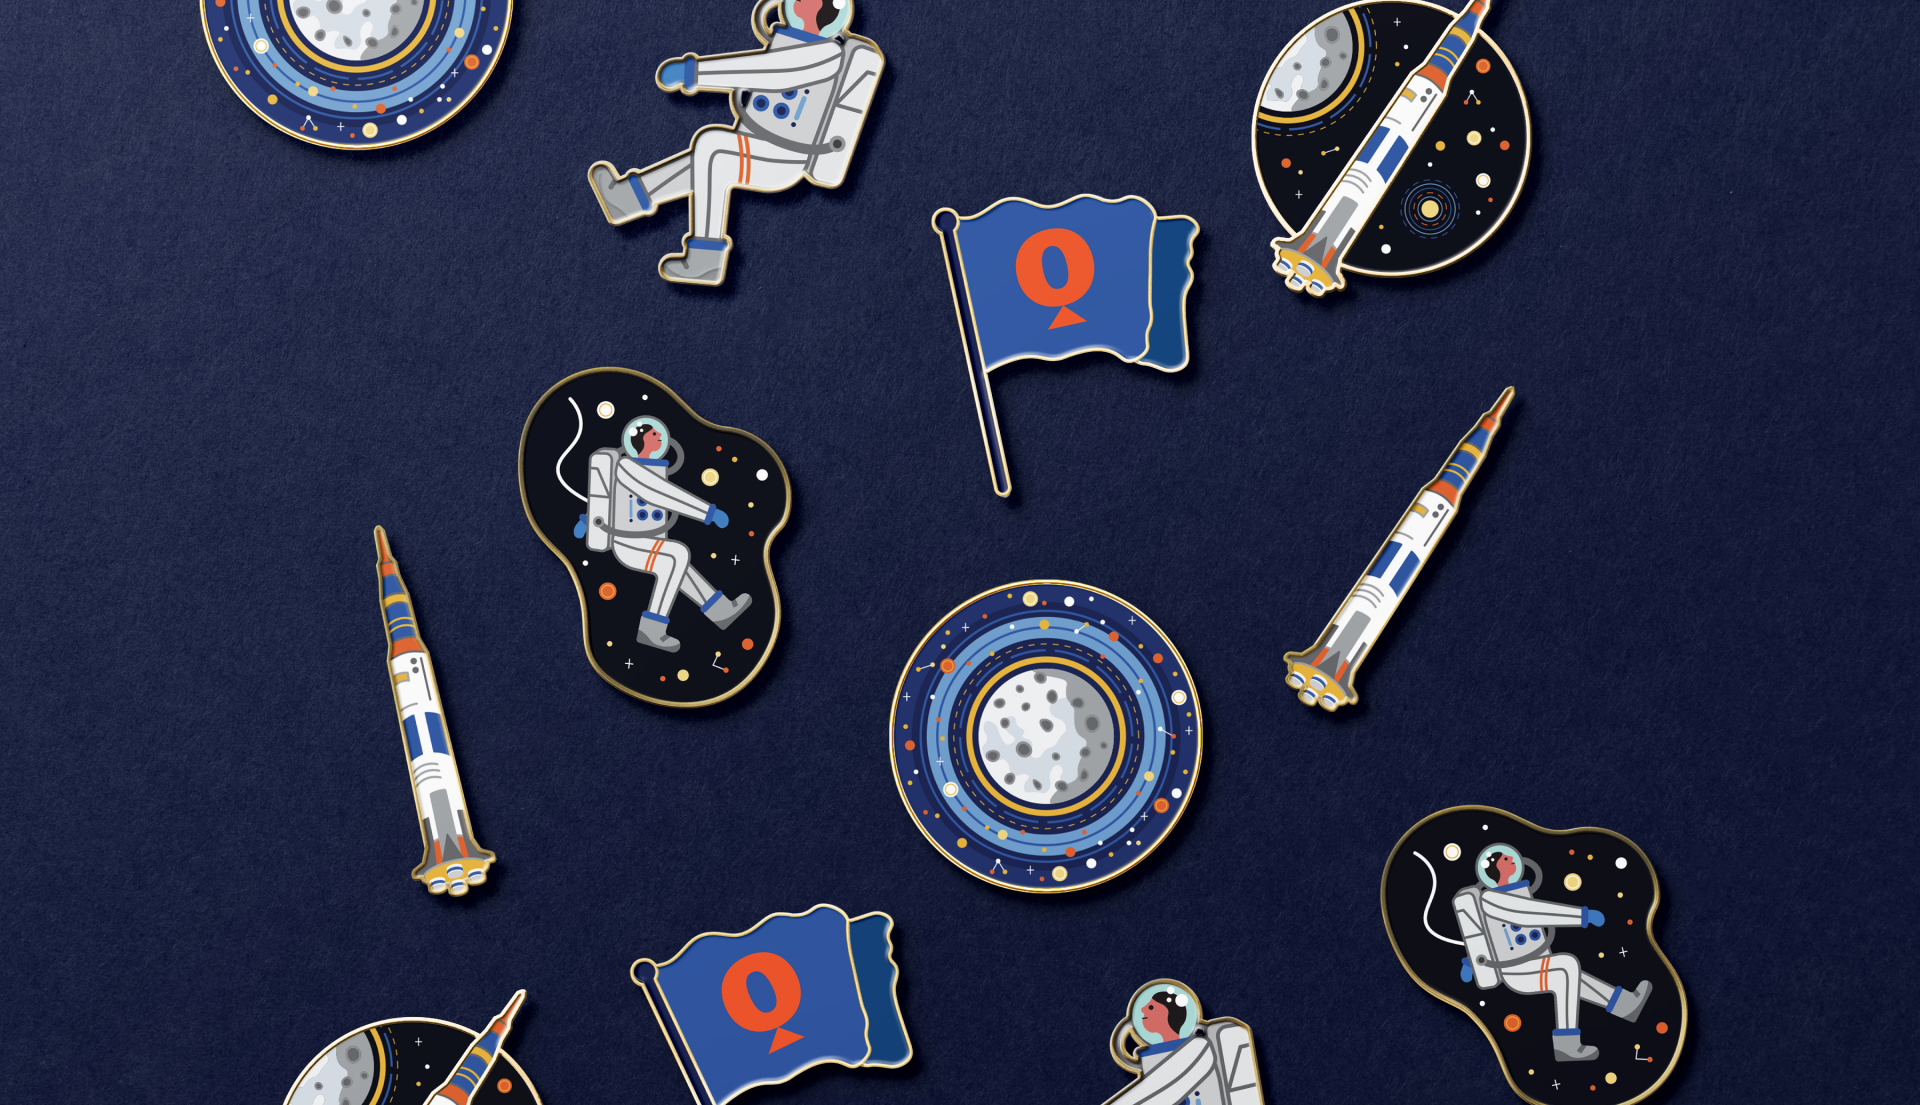 A mix of enamel pins laid out on a blue background. Enamel pins feature the moon, rocket, astronaut, and Questacon 'Q' flag.